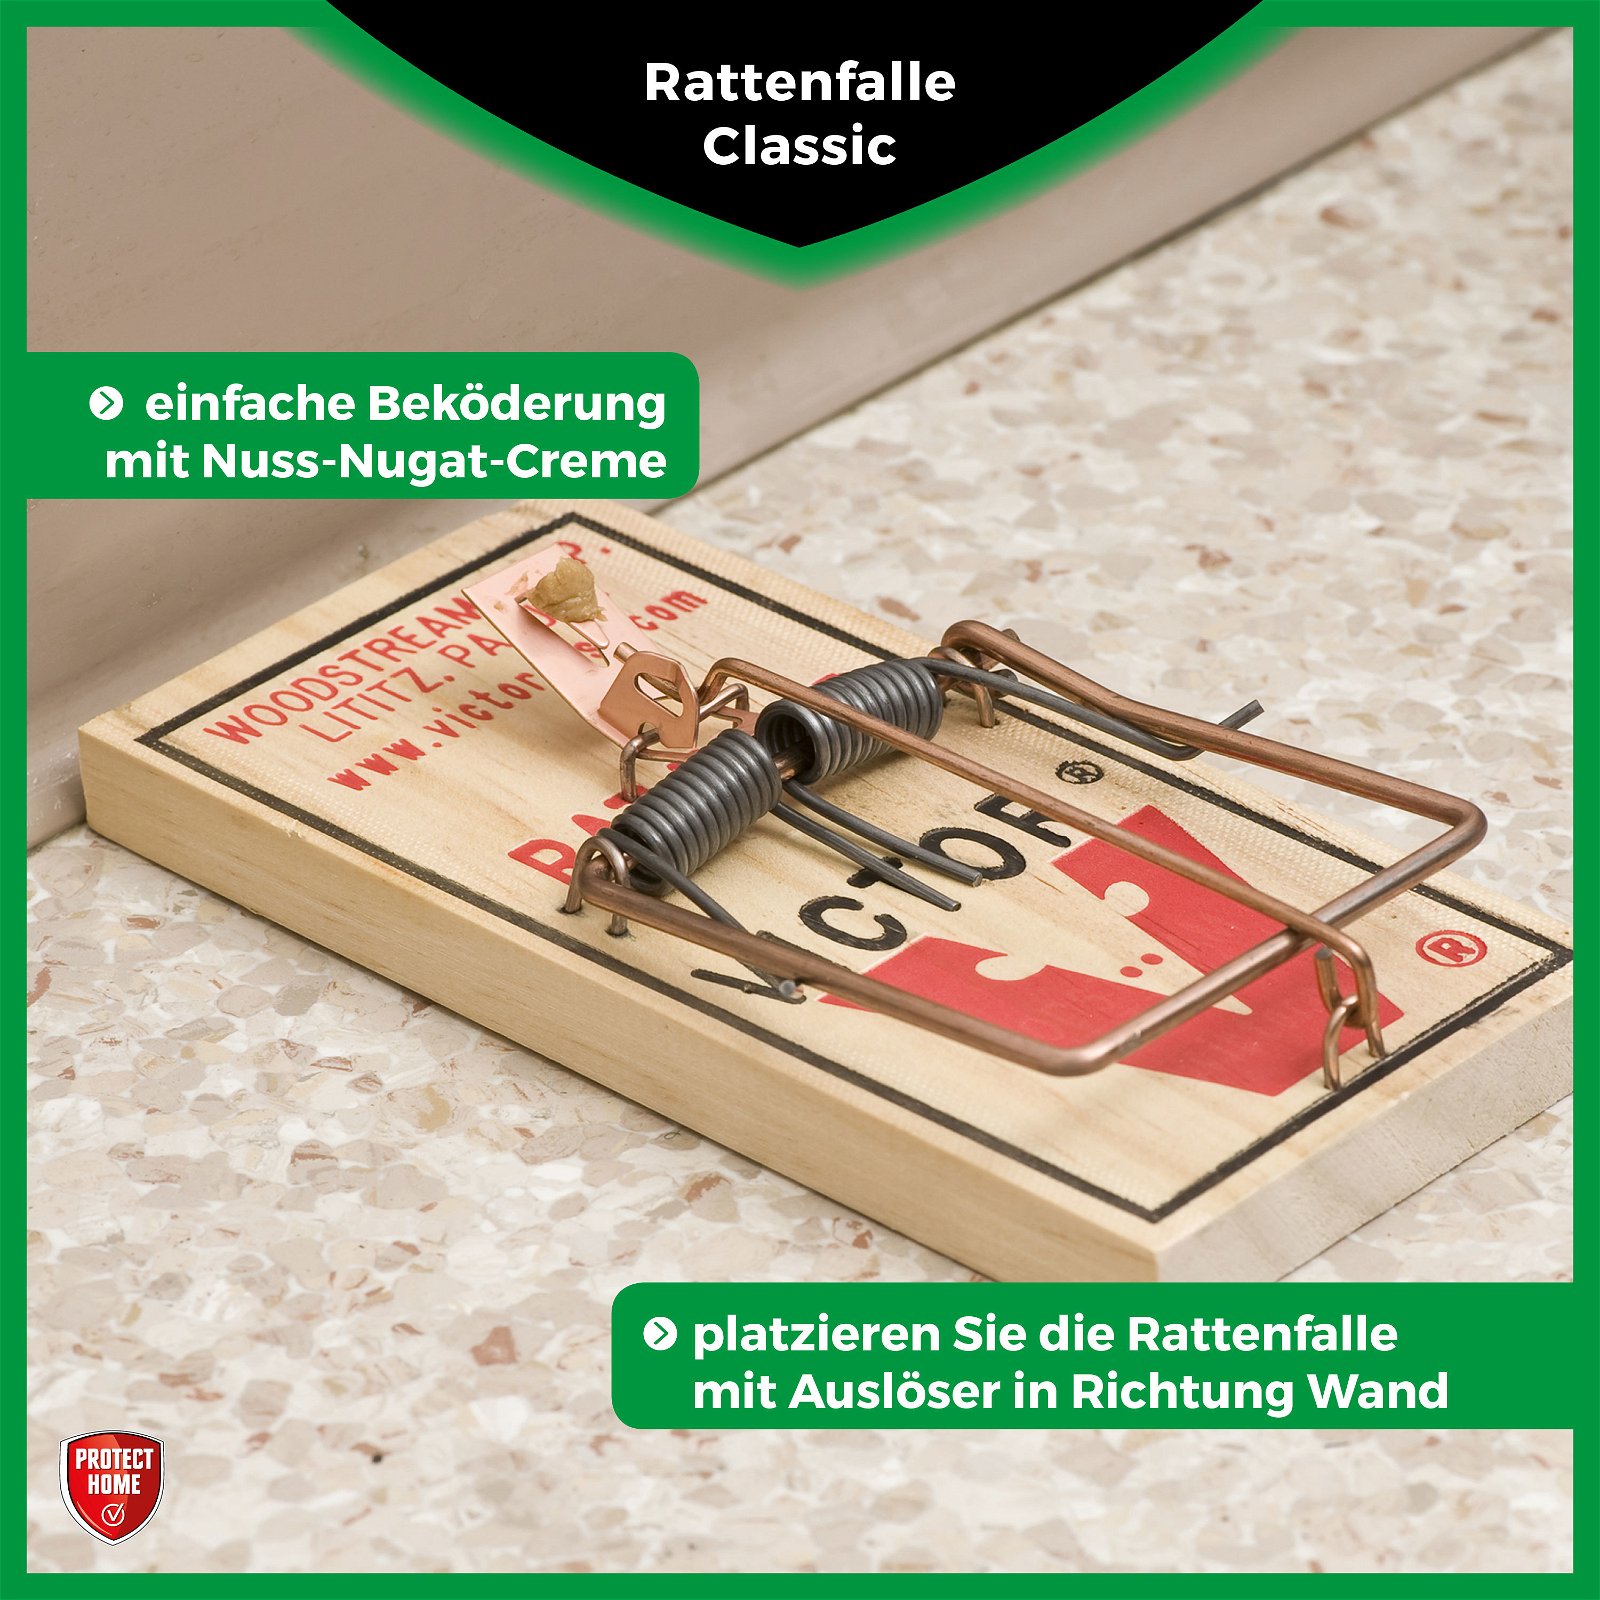 Rattenfalle Classic, Protect Home, 1 Stück